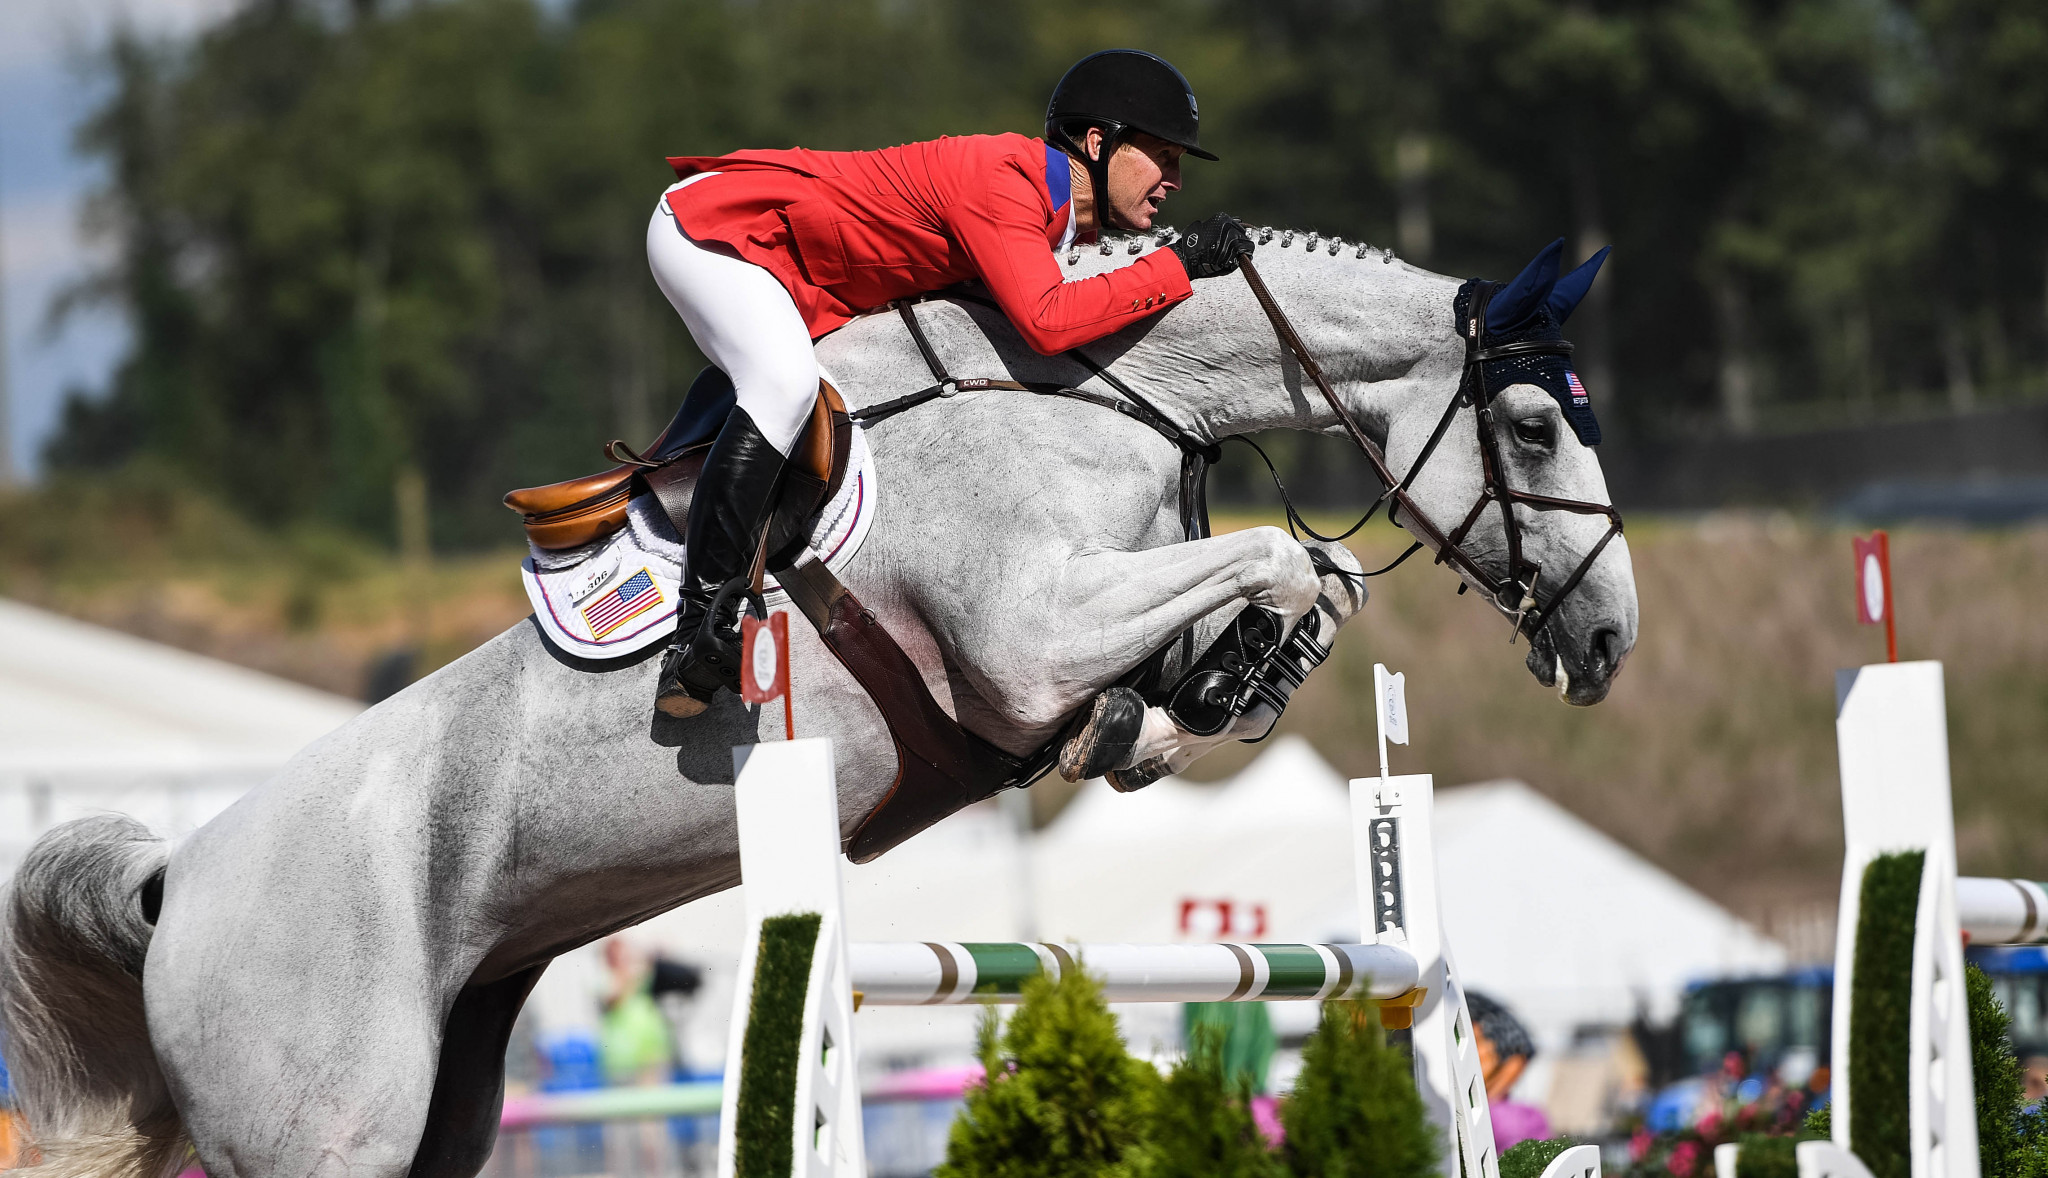 Ward rises to challenge to earn US first team jumping gold in FEI World Equestrian Games